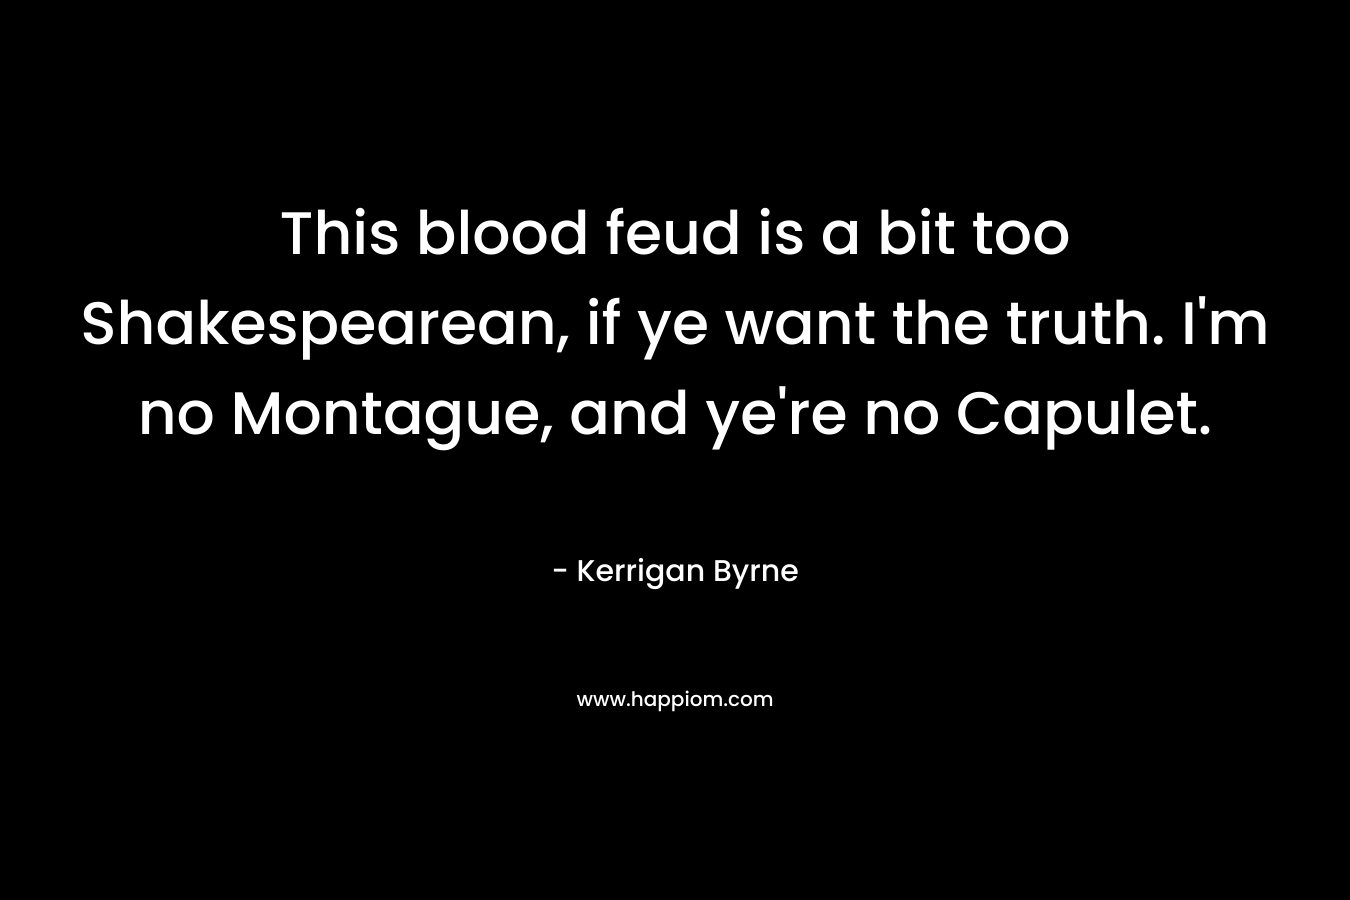 This blood feud is a bit too Shakespearean, if ye want the truth. I'm no Montague, and ye're no Capulet.